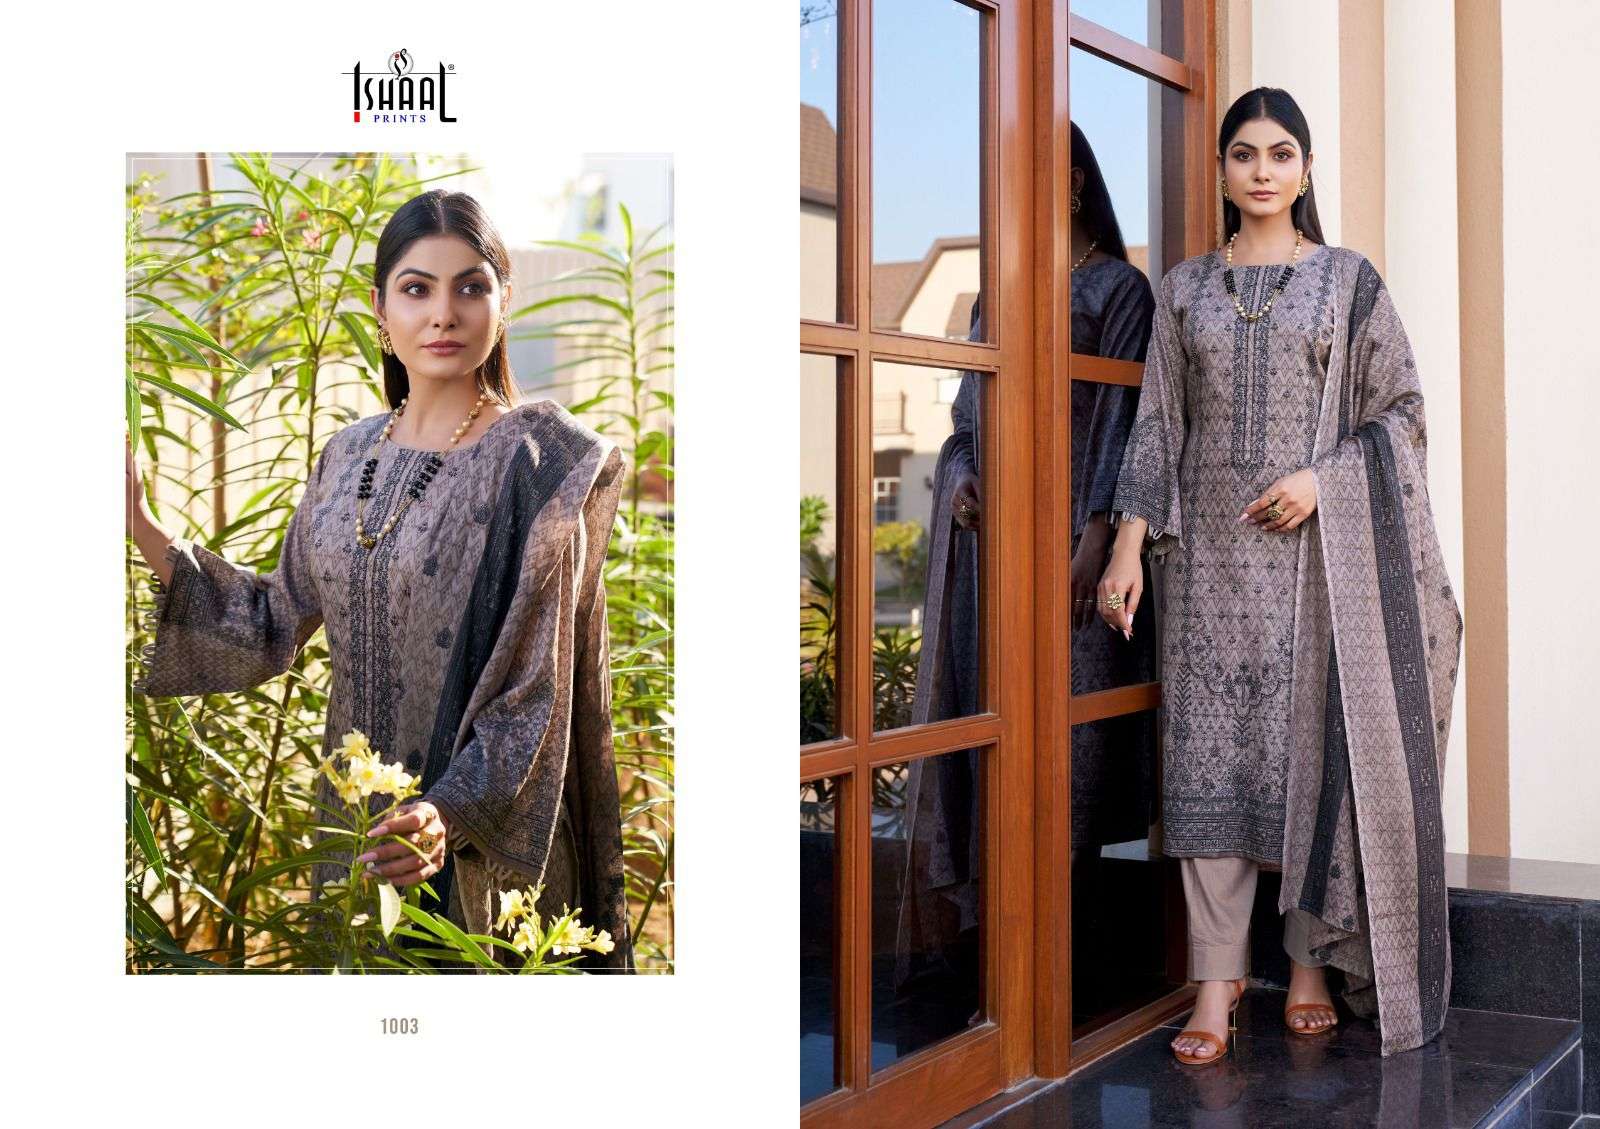 ishaal prints embroidered lawn combo 1001-1008 series trendy designer dress material catalogue design surat 